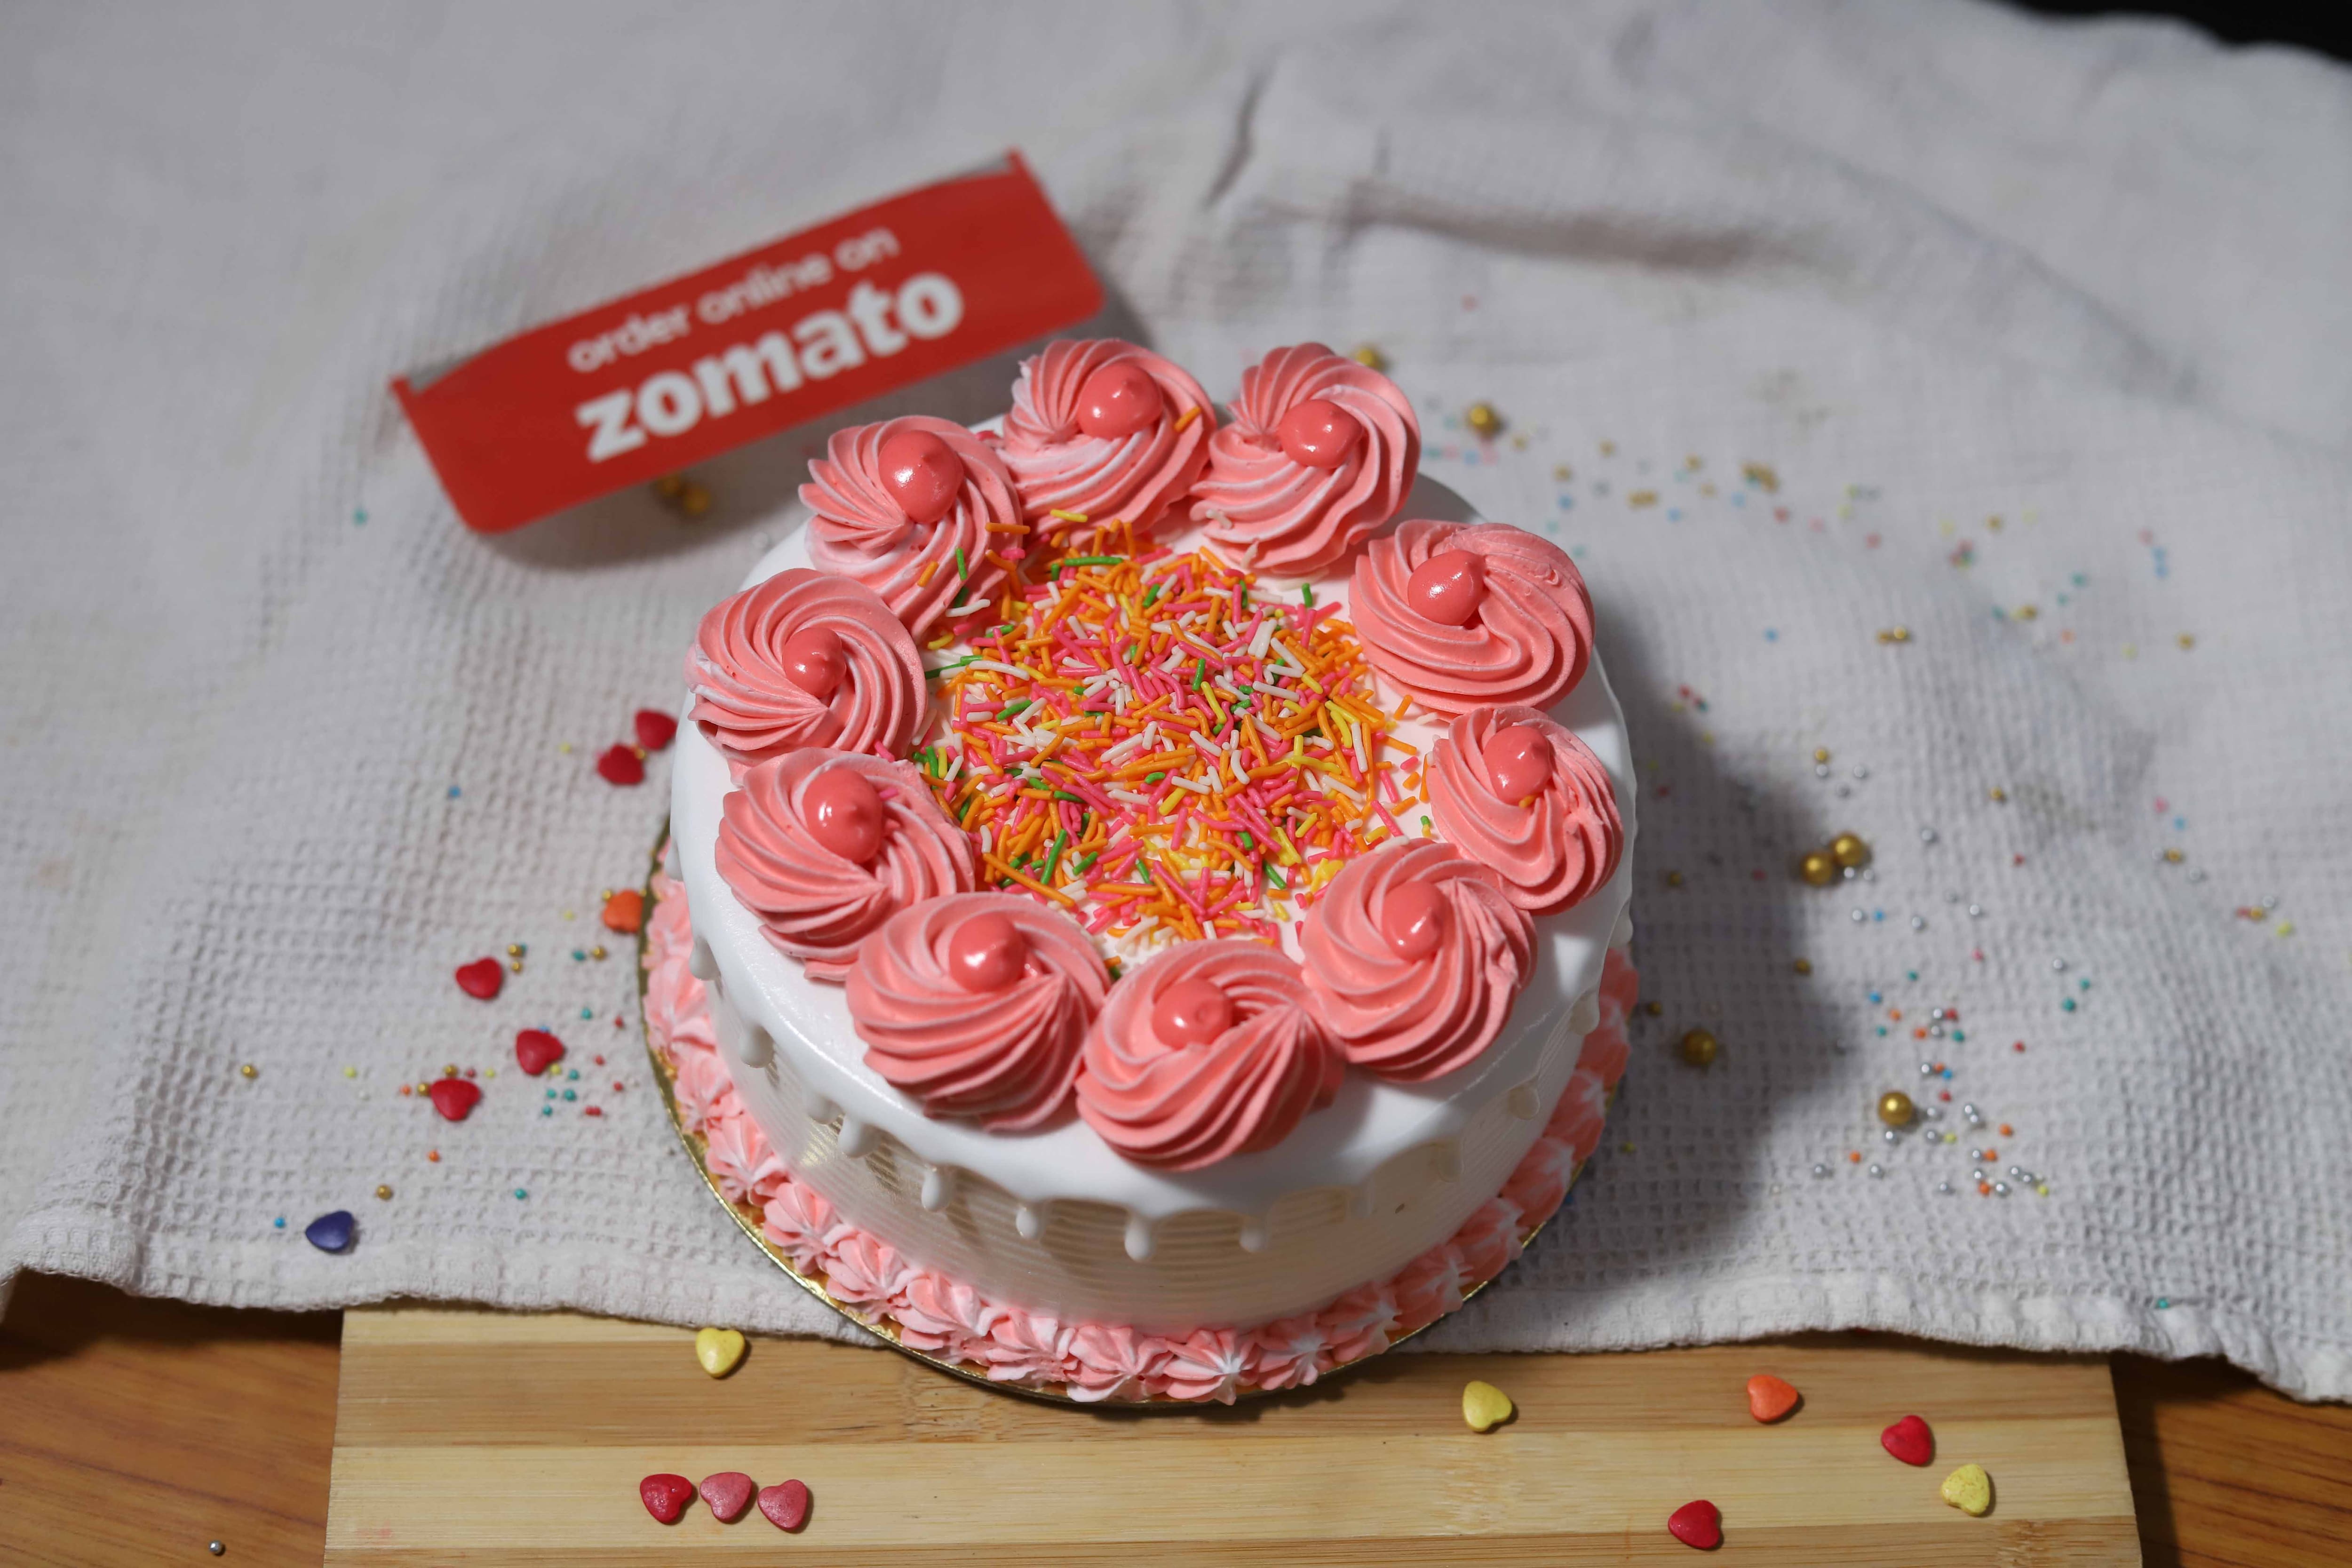 Love for moms': Zomato CEO as company sold 150 cakes every min on Mother's  Day | Latest News India - Hindustan Times